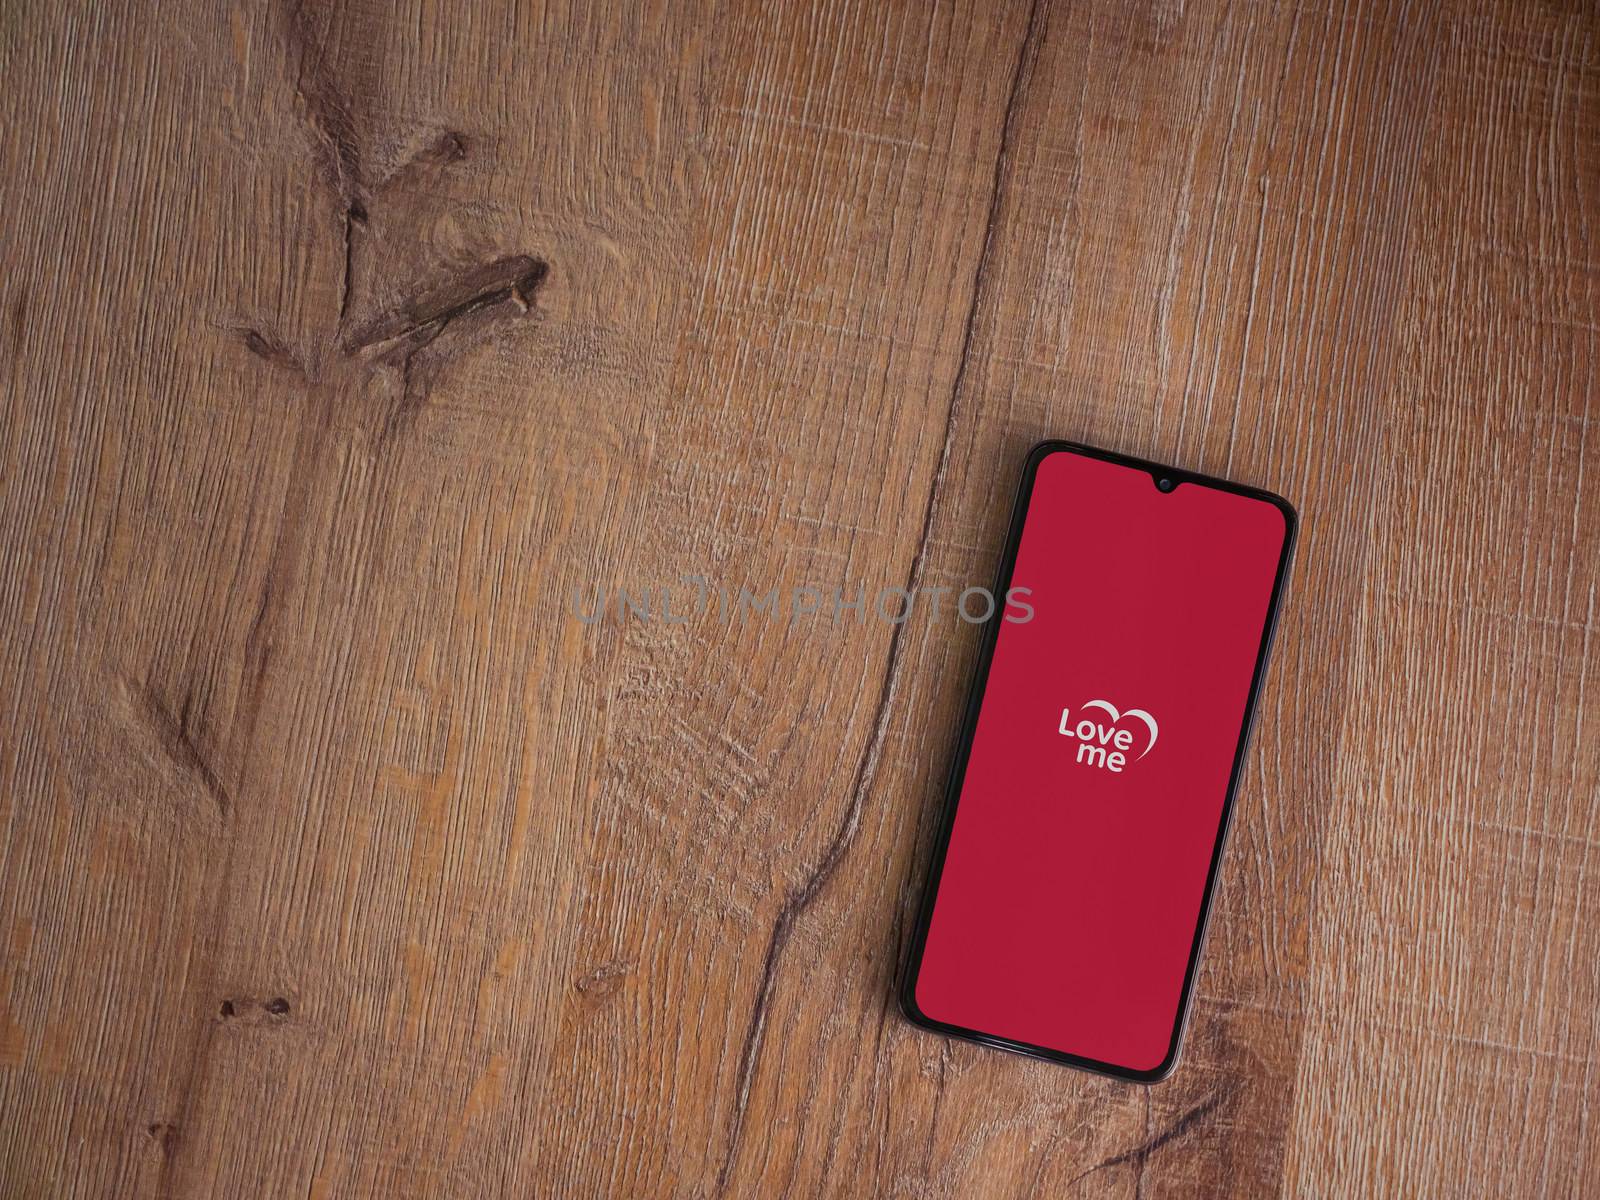 Lod, Israel - July 8, 2020: Loveme app launch screen with logo on the display of a black mobile smartphone on wooden background. Top view flat lay with copy space.